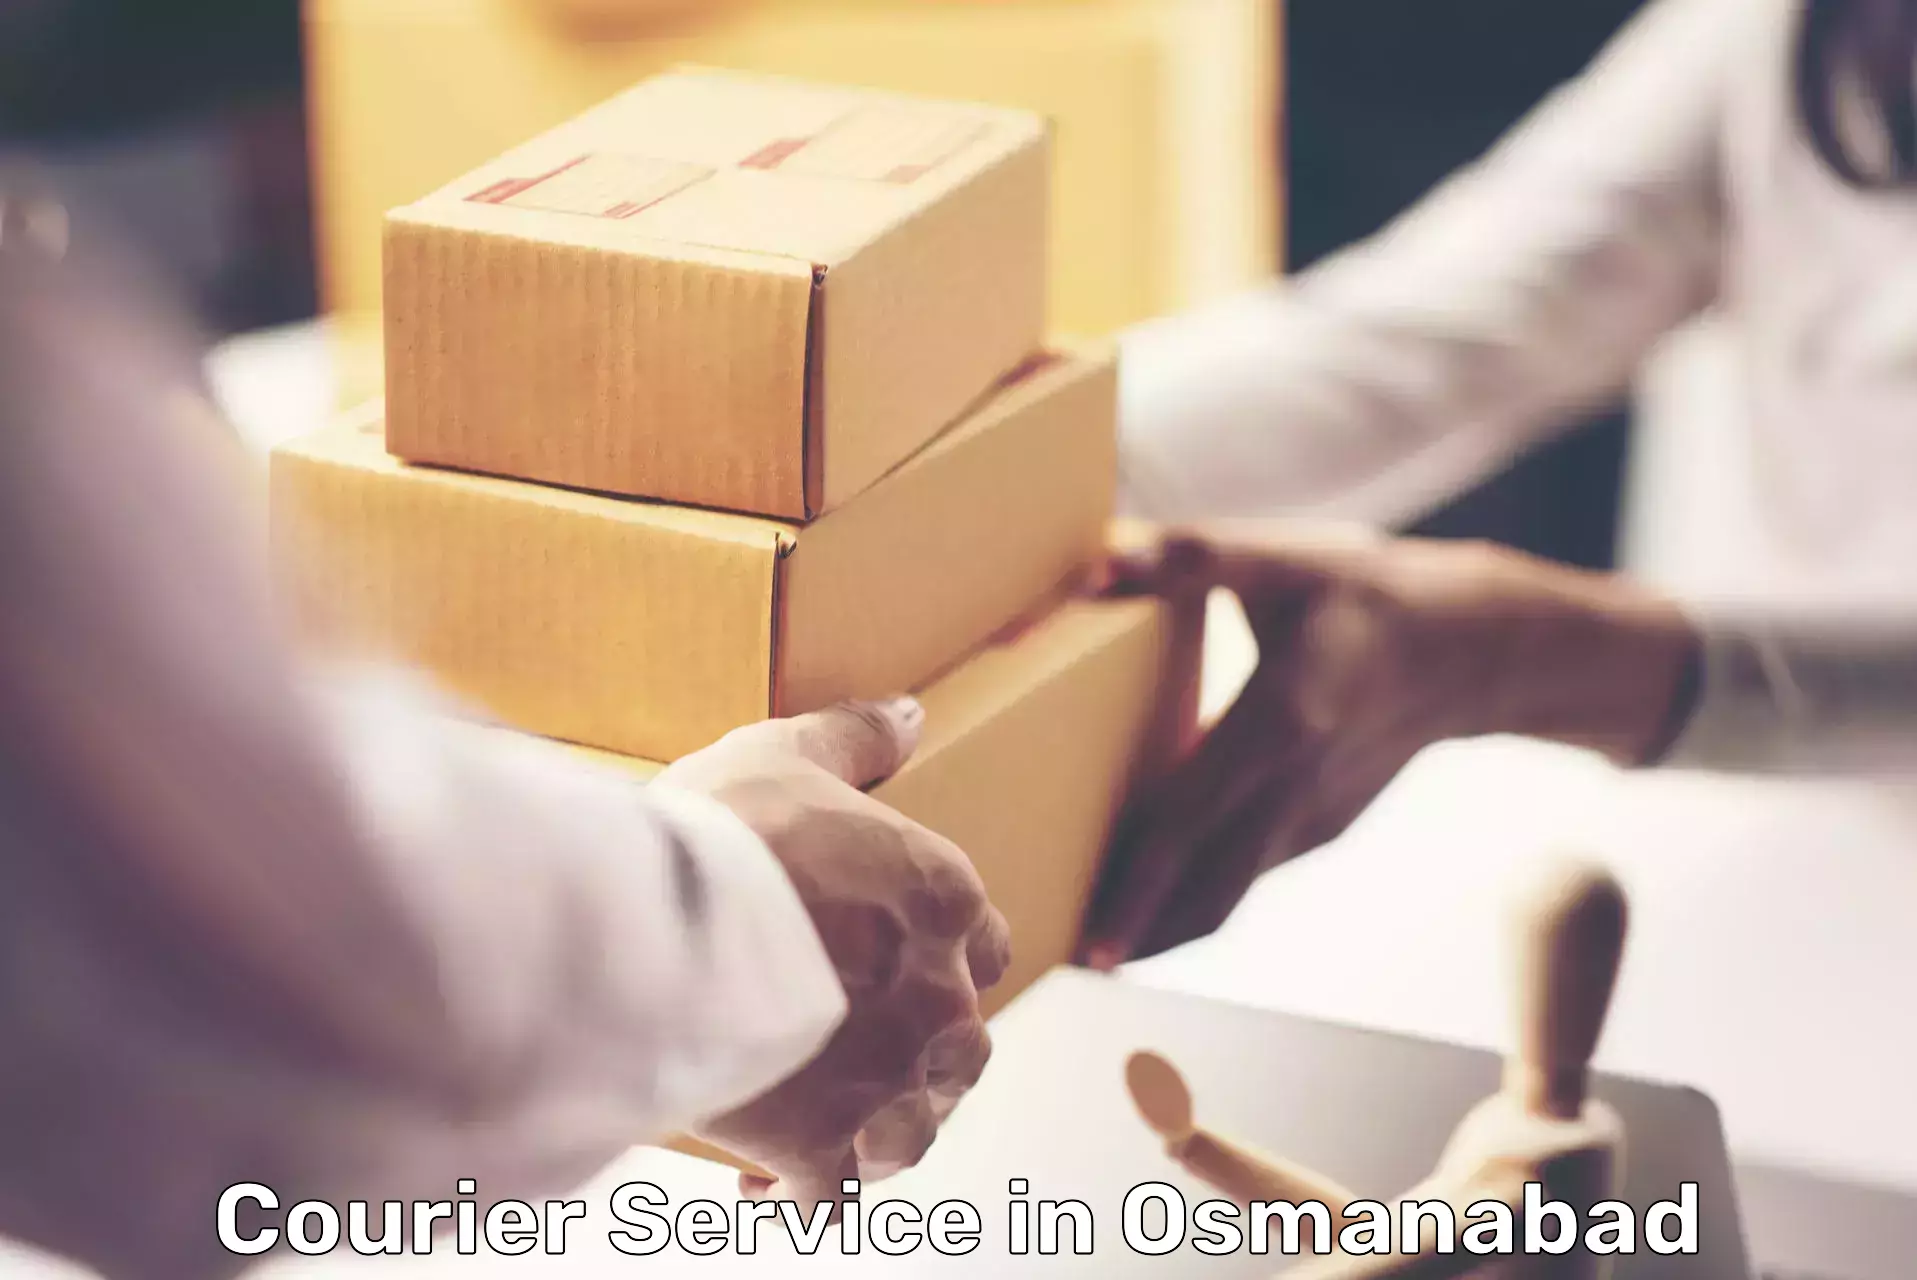 Budget-friendly shipping in Osmanabad